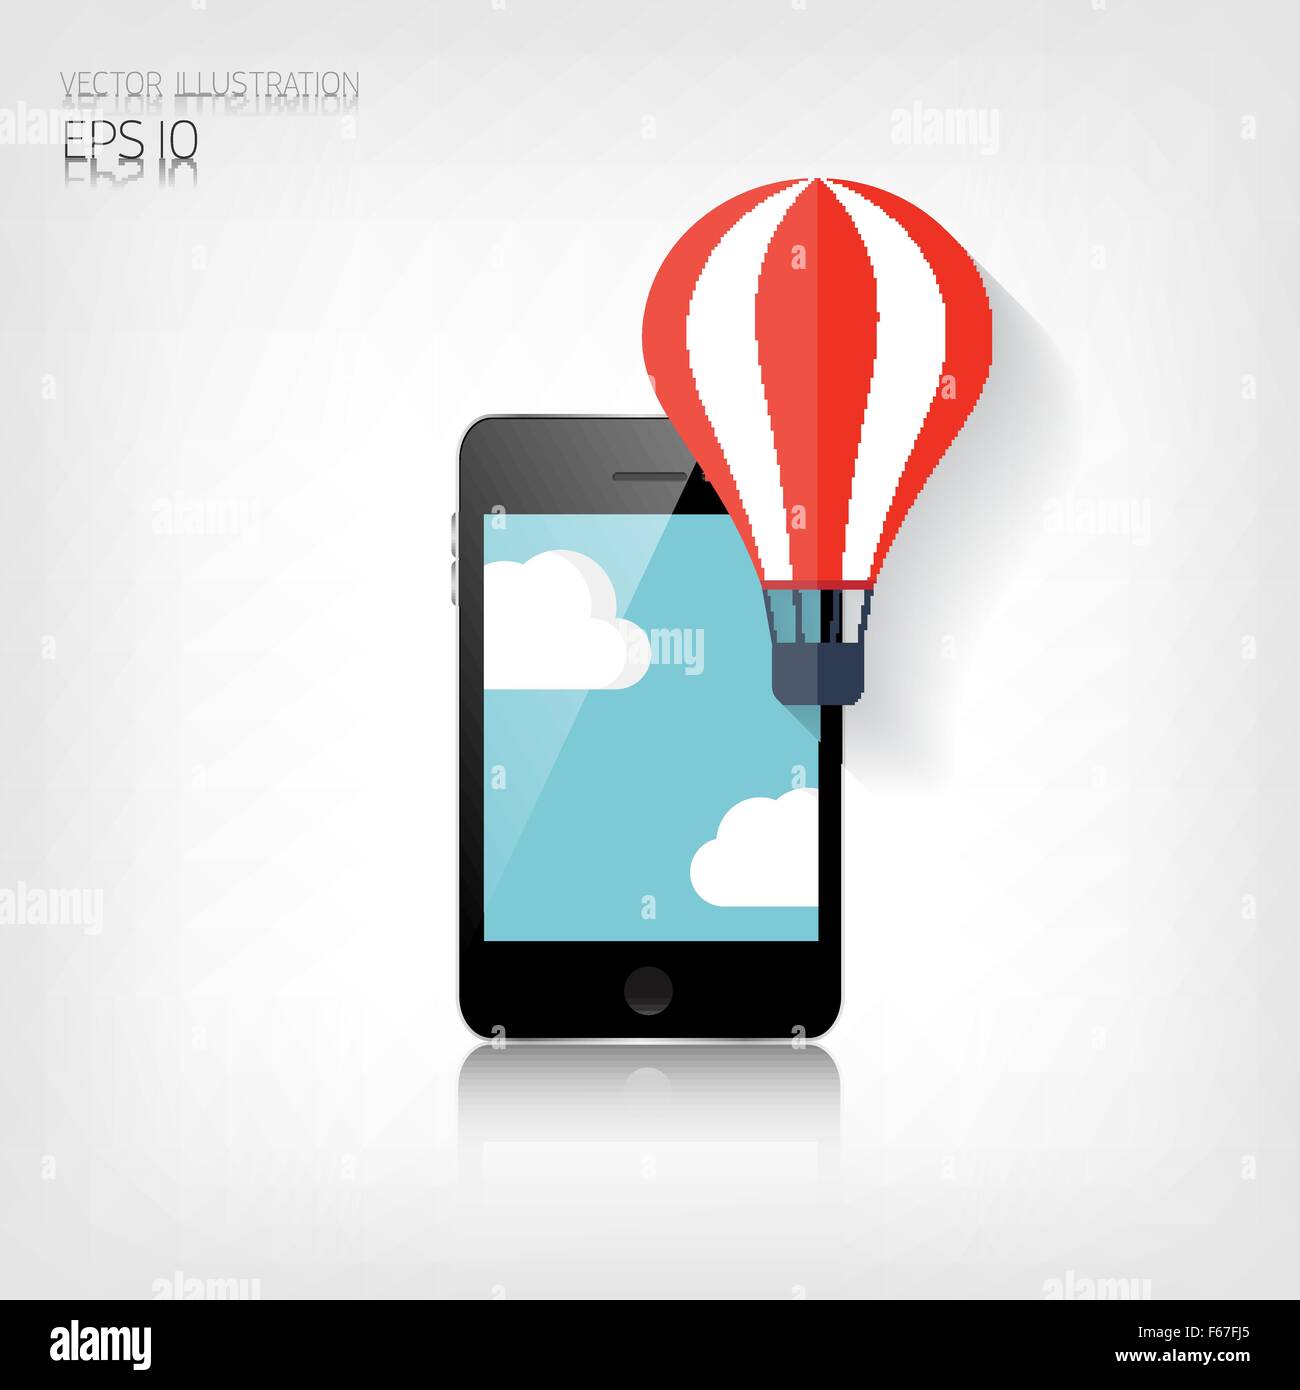 Flat air balloon web icon.Realistic detalized flat smartphone Stock Vector